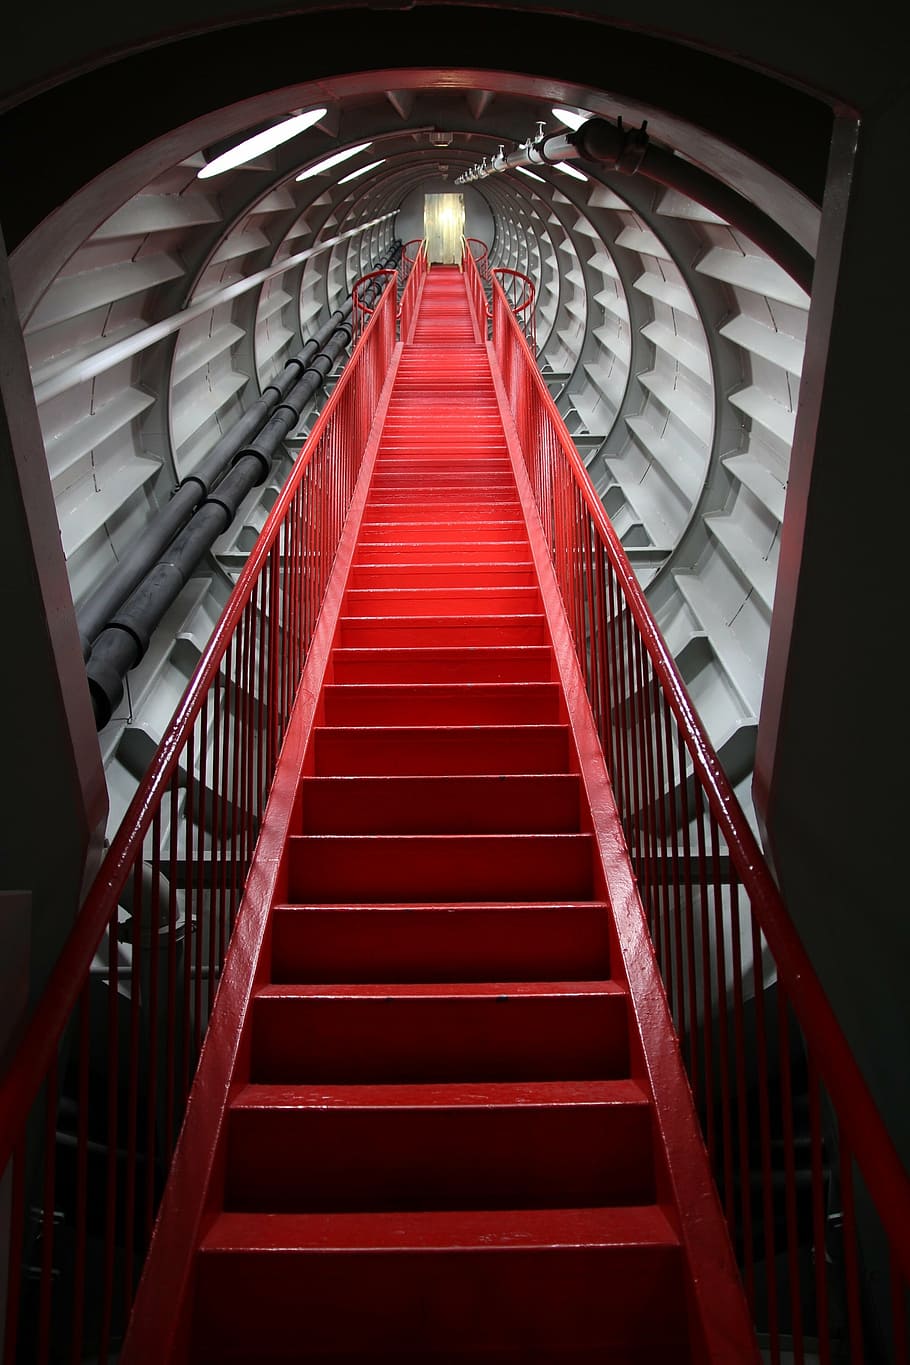 red, metal staircase, going, upward, stairs, atomium, brussels, staircase, world's fair, places of interest